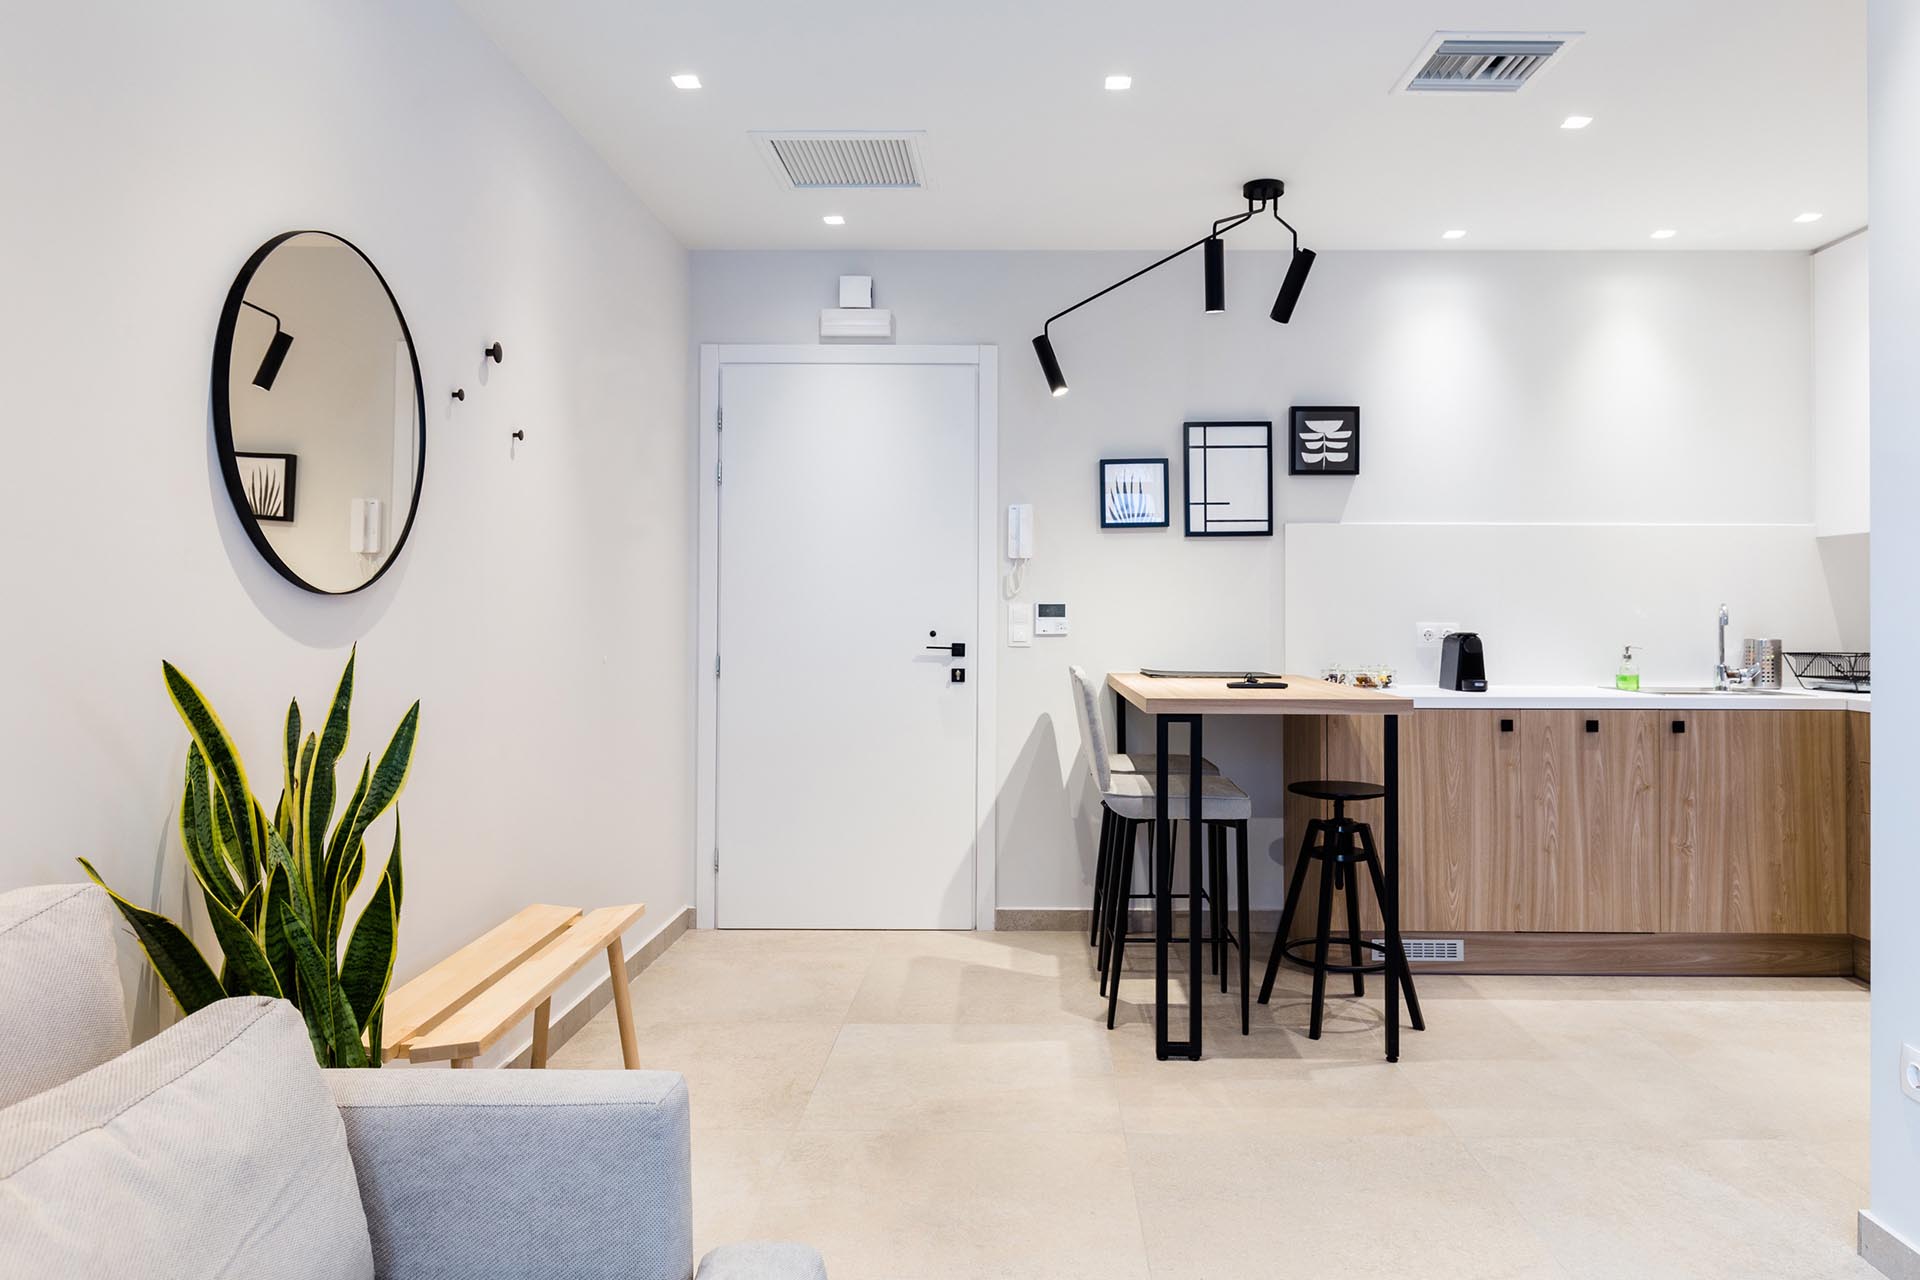 This small apartment has an open interior with a kitchen that features minimalist white upper cabinets and wood lower cabinets, as well as a bar height table.